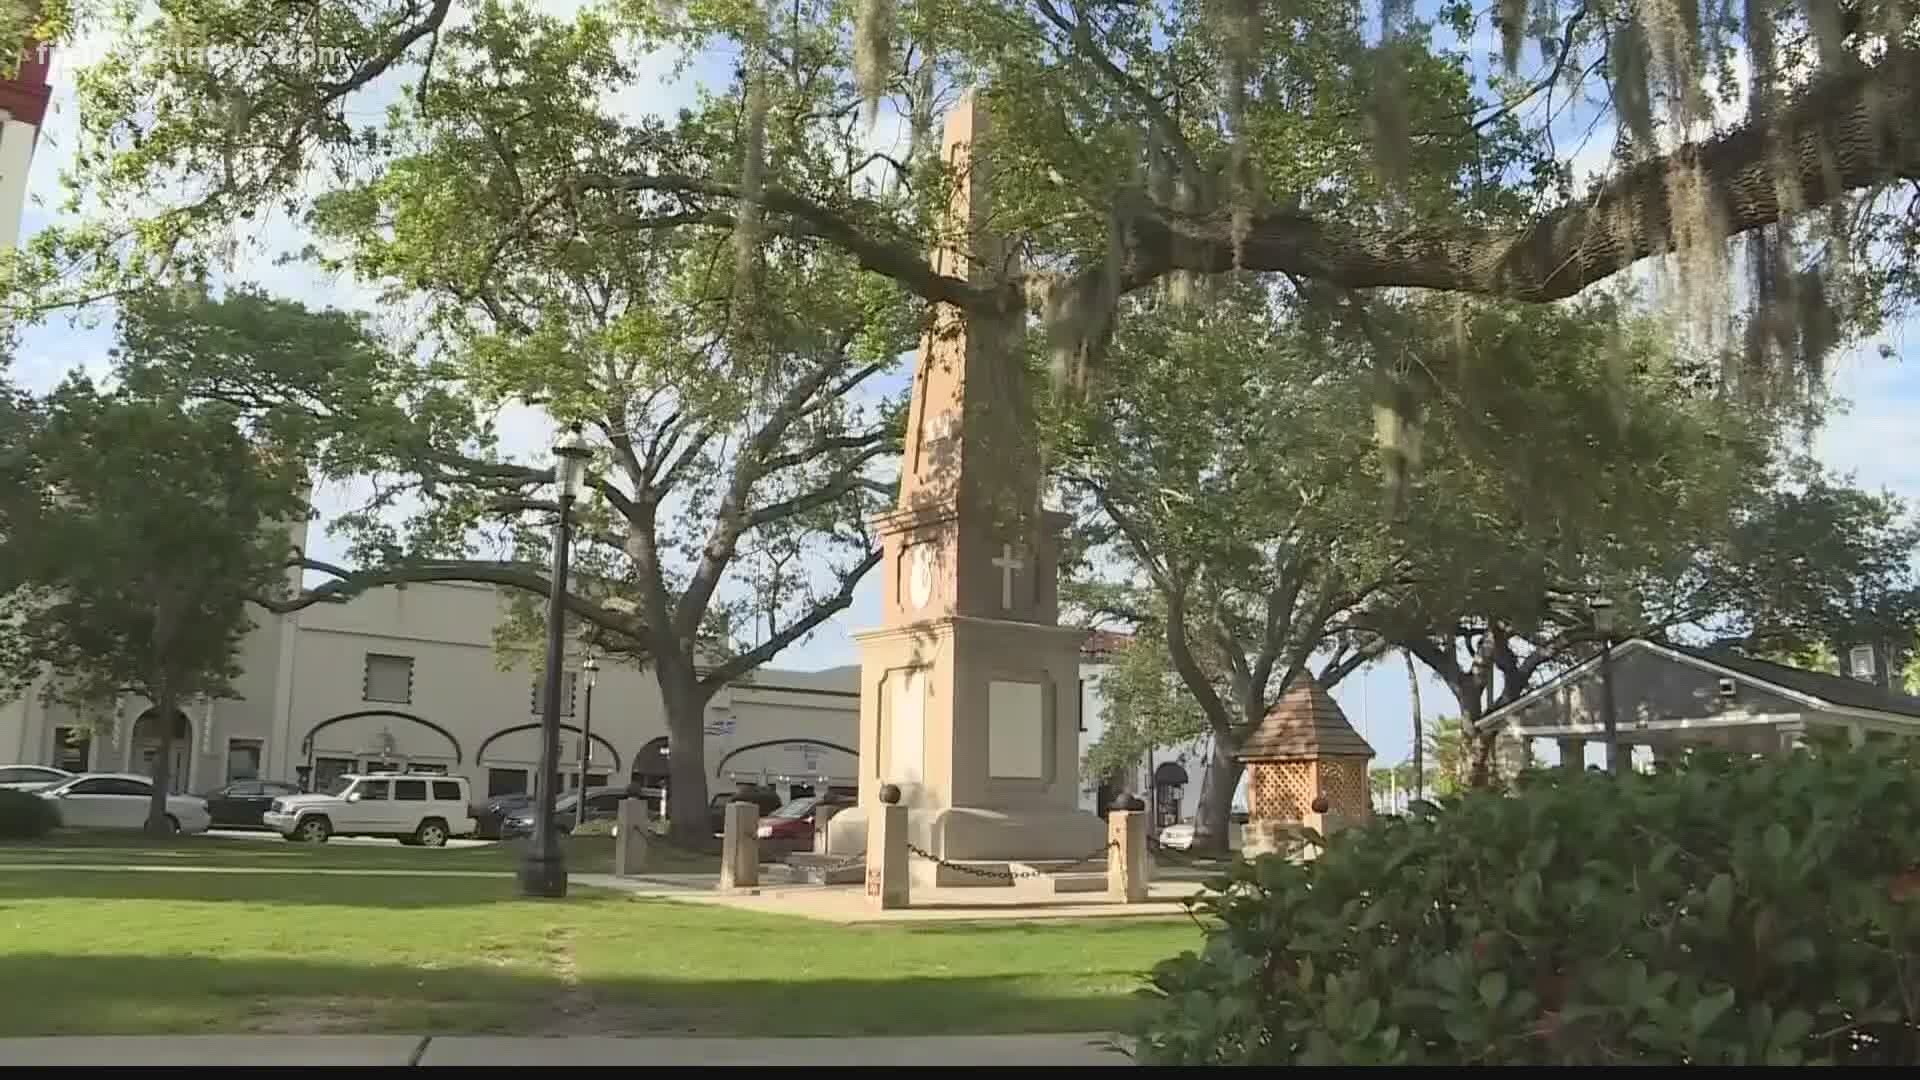 The tower, which currently sits in the main plaza in Downtown St. Augustine has plans to be moved.